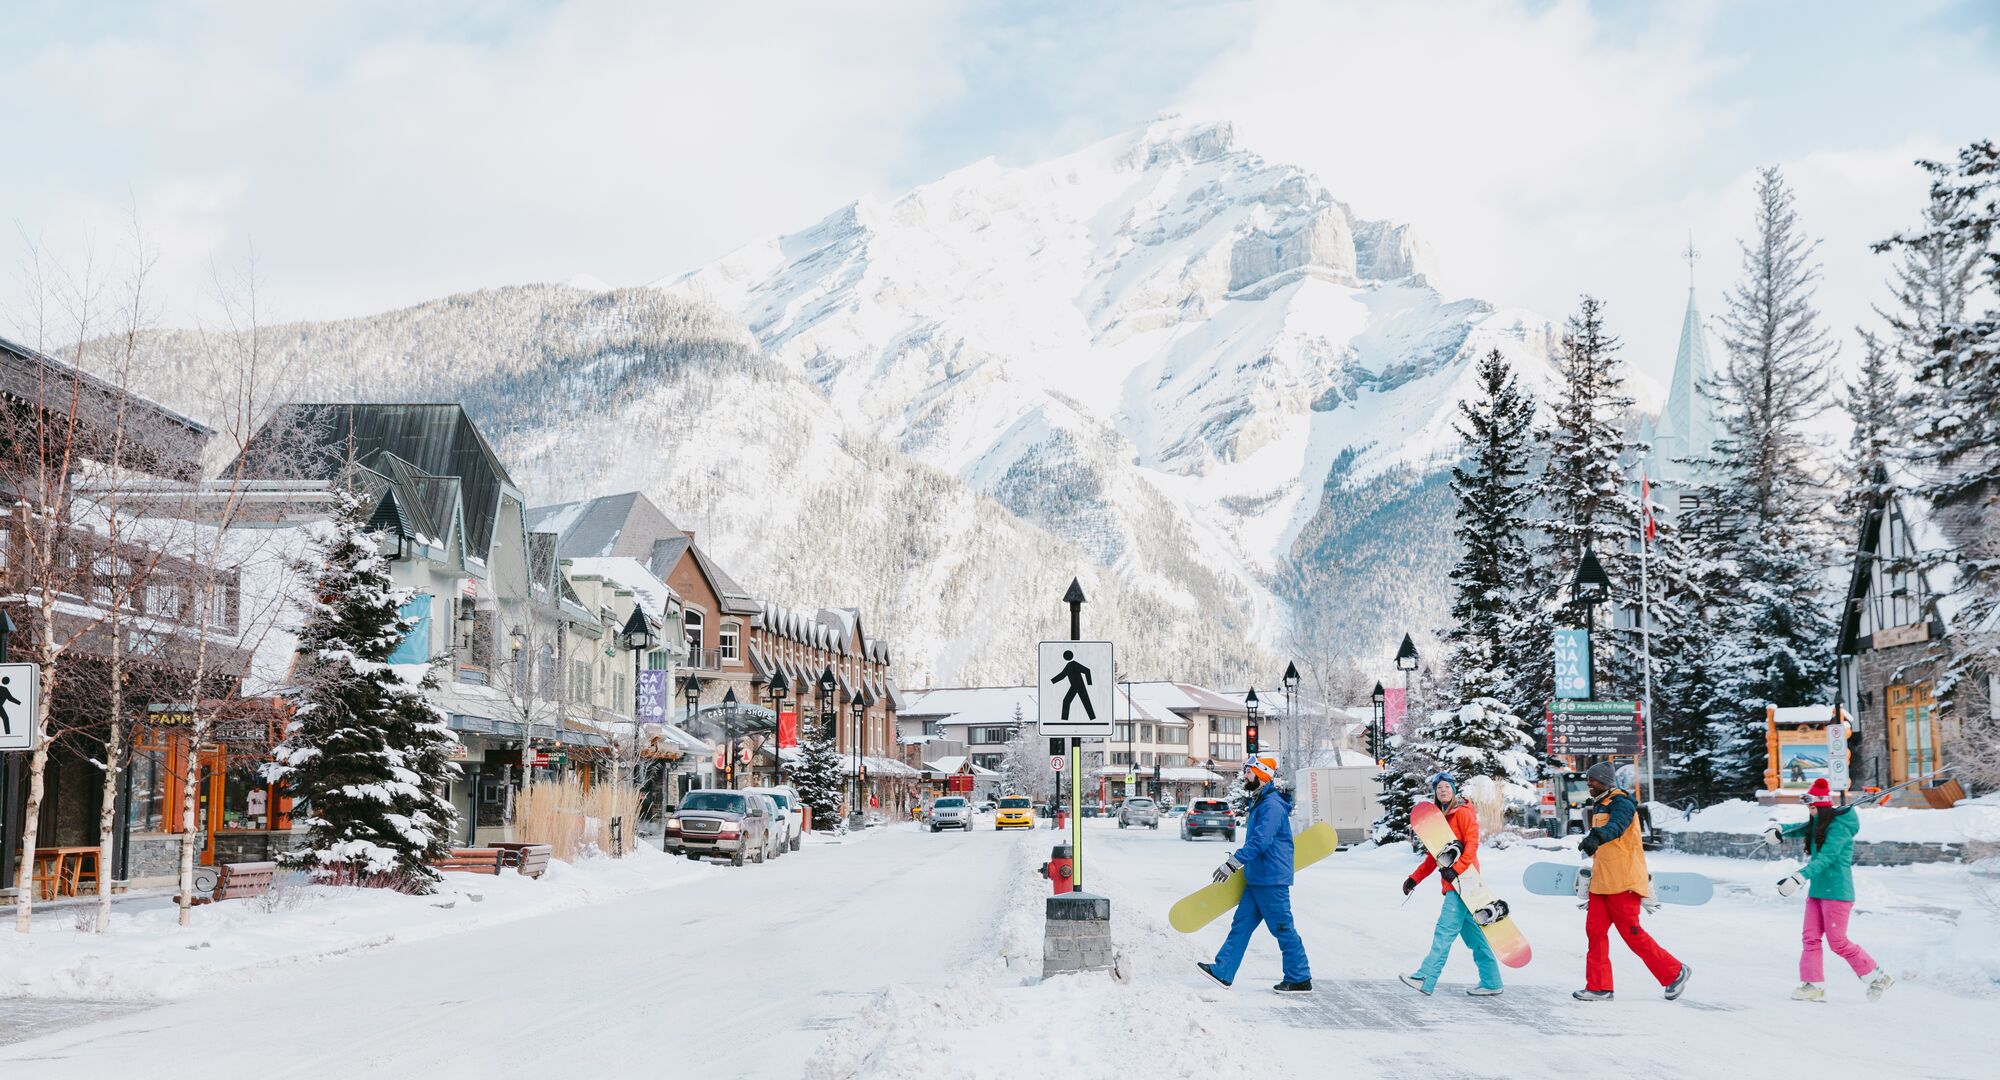 Four snowboarders cross Banff Avenue with Cascade Mountain in the background.